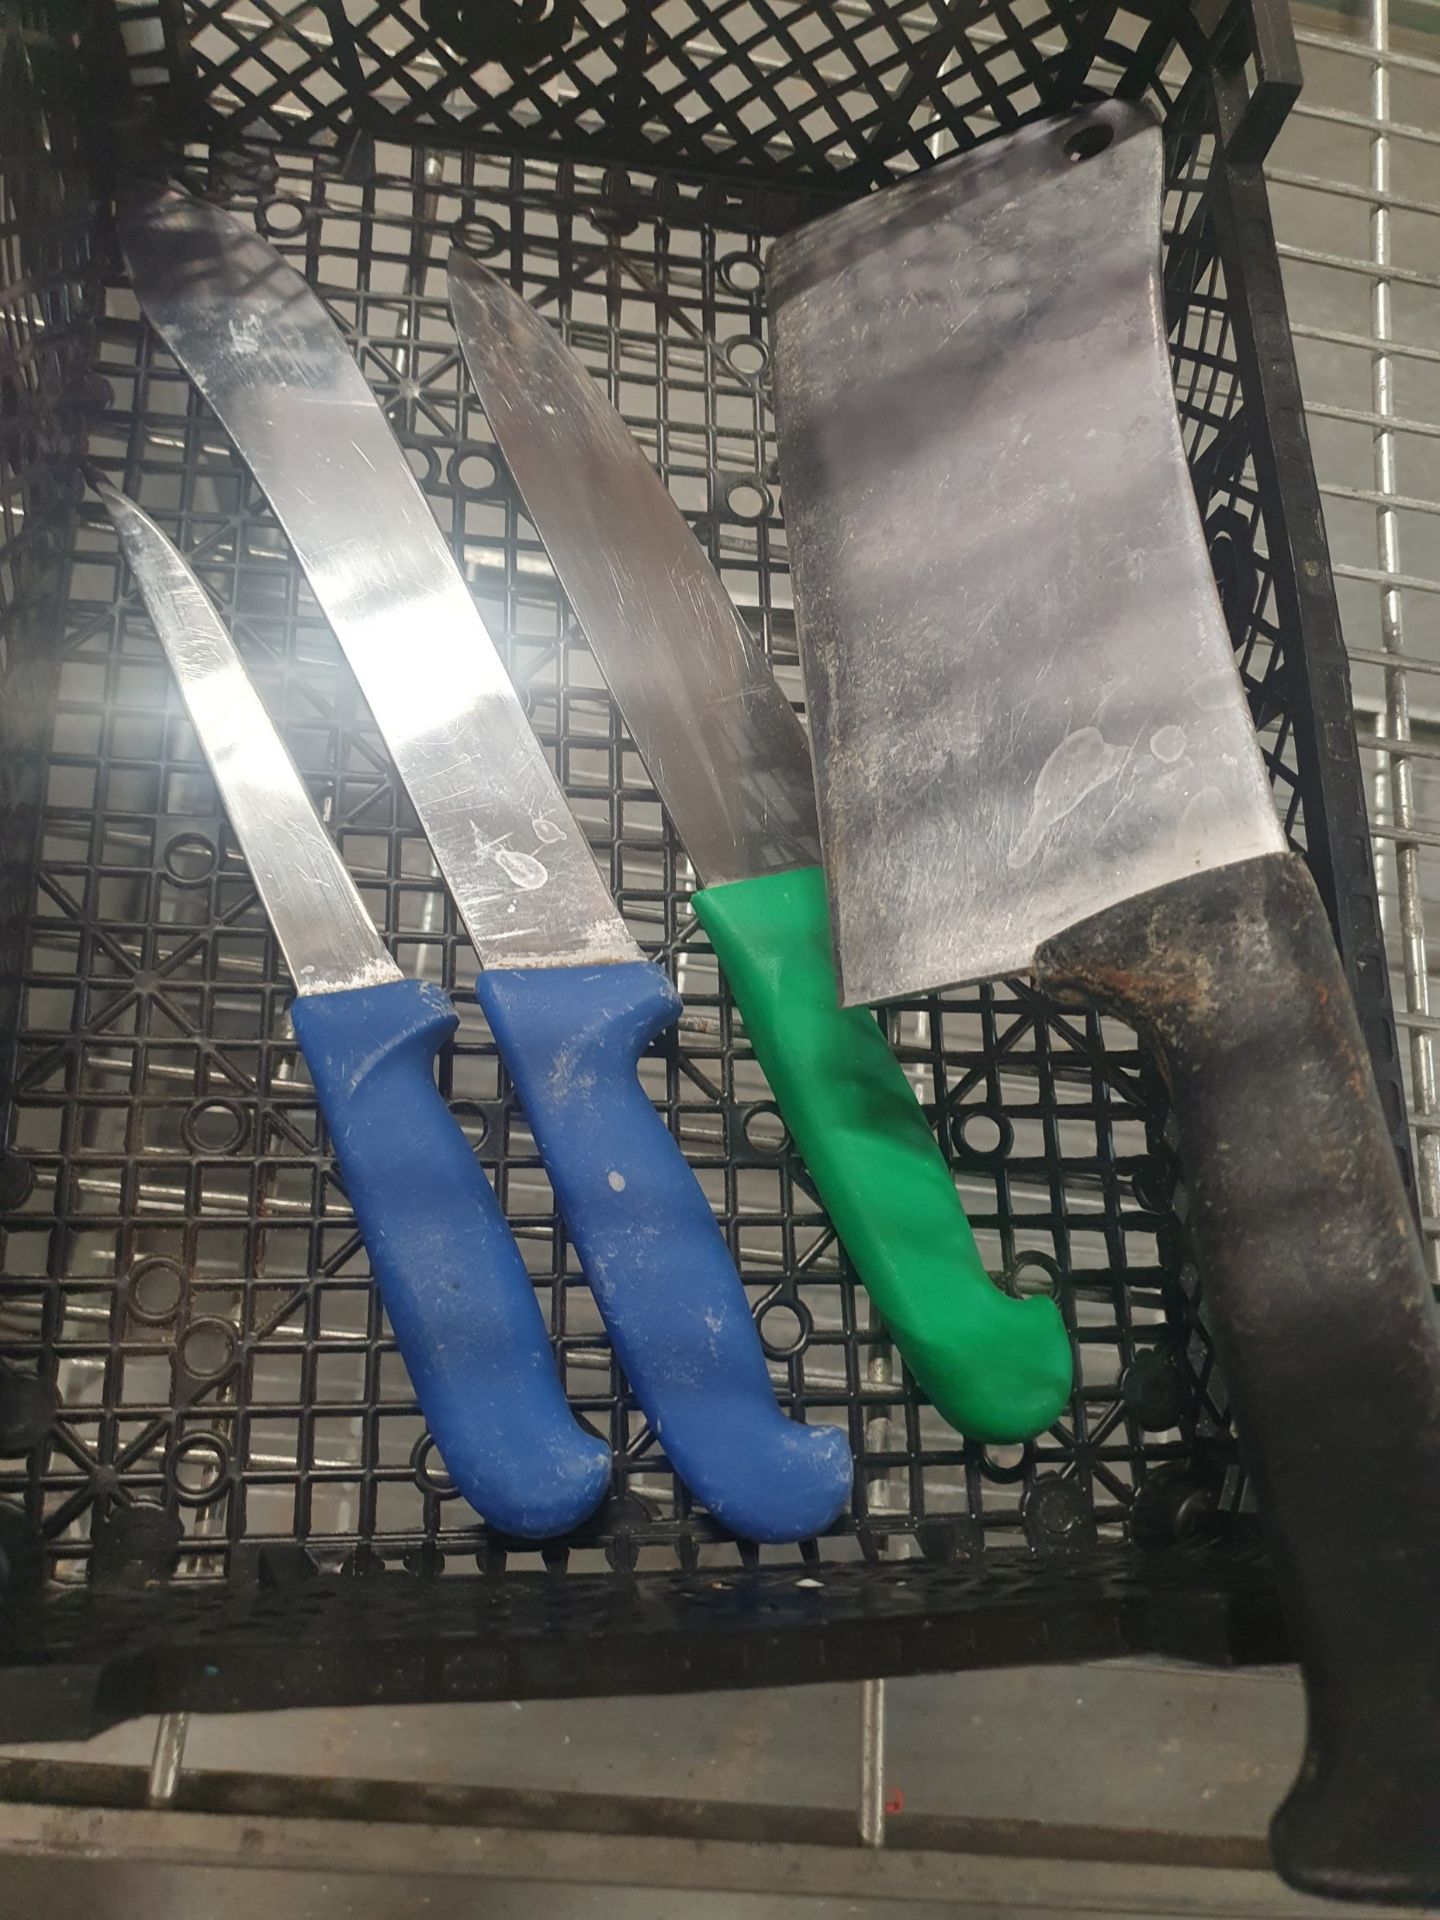 * heavy meat cleaver plus 3 other knives